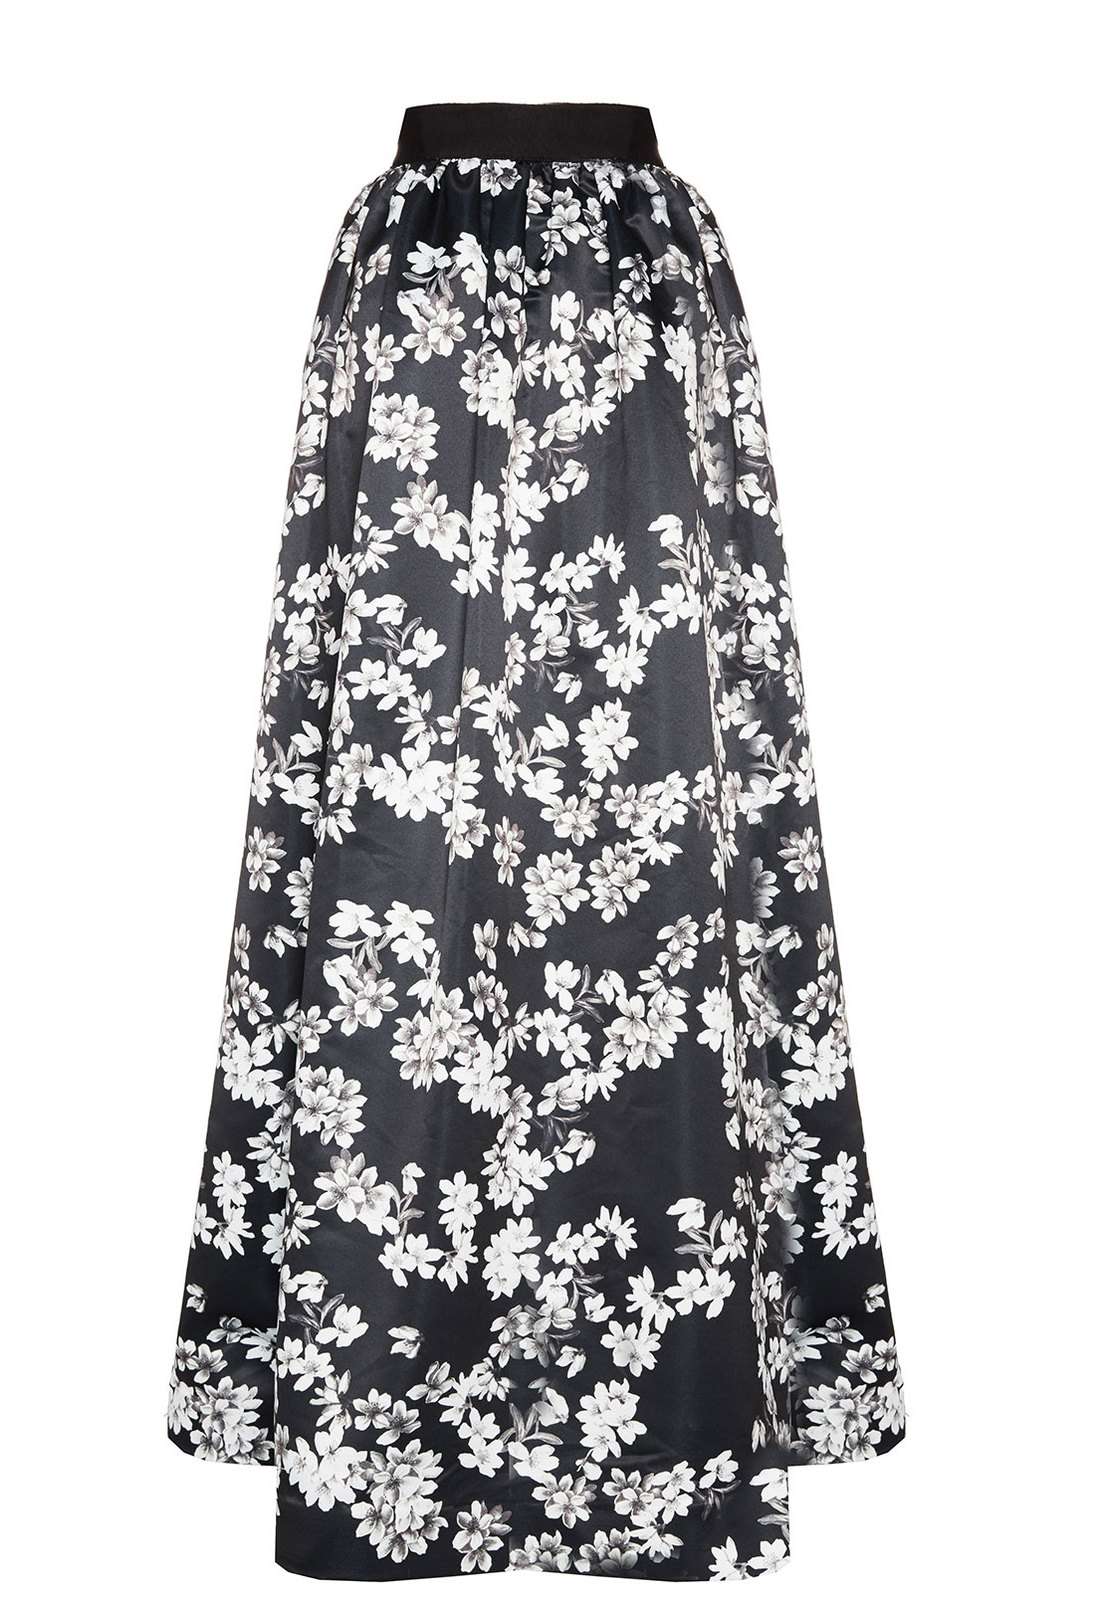 Alice + Olivia Tina Long Ball Gown Skirt in Gray - Lyst